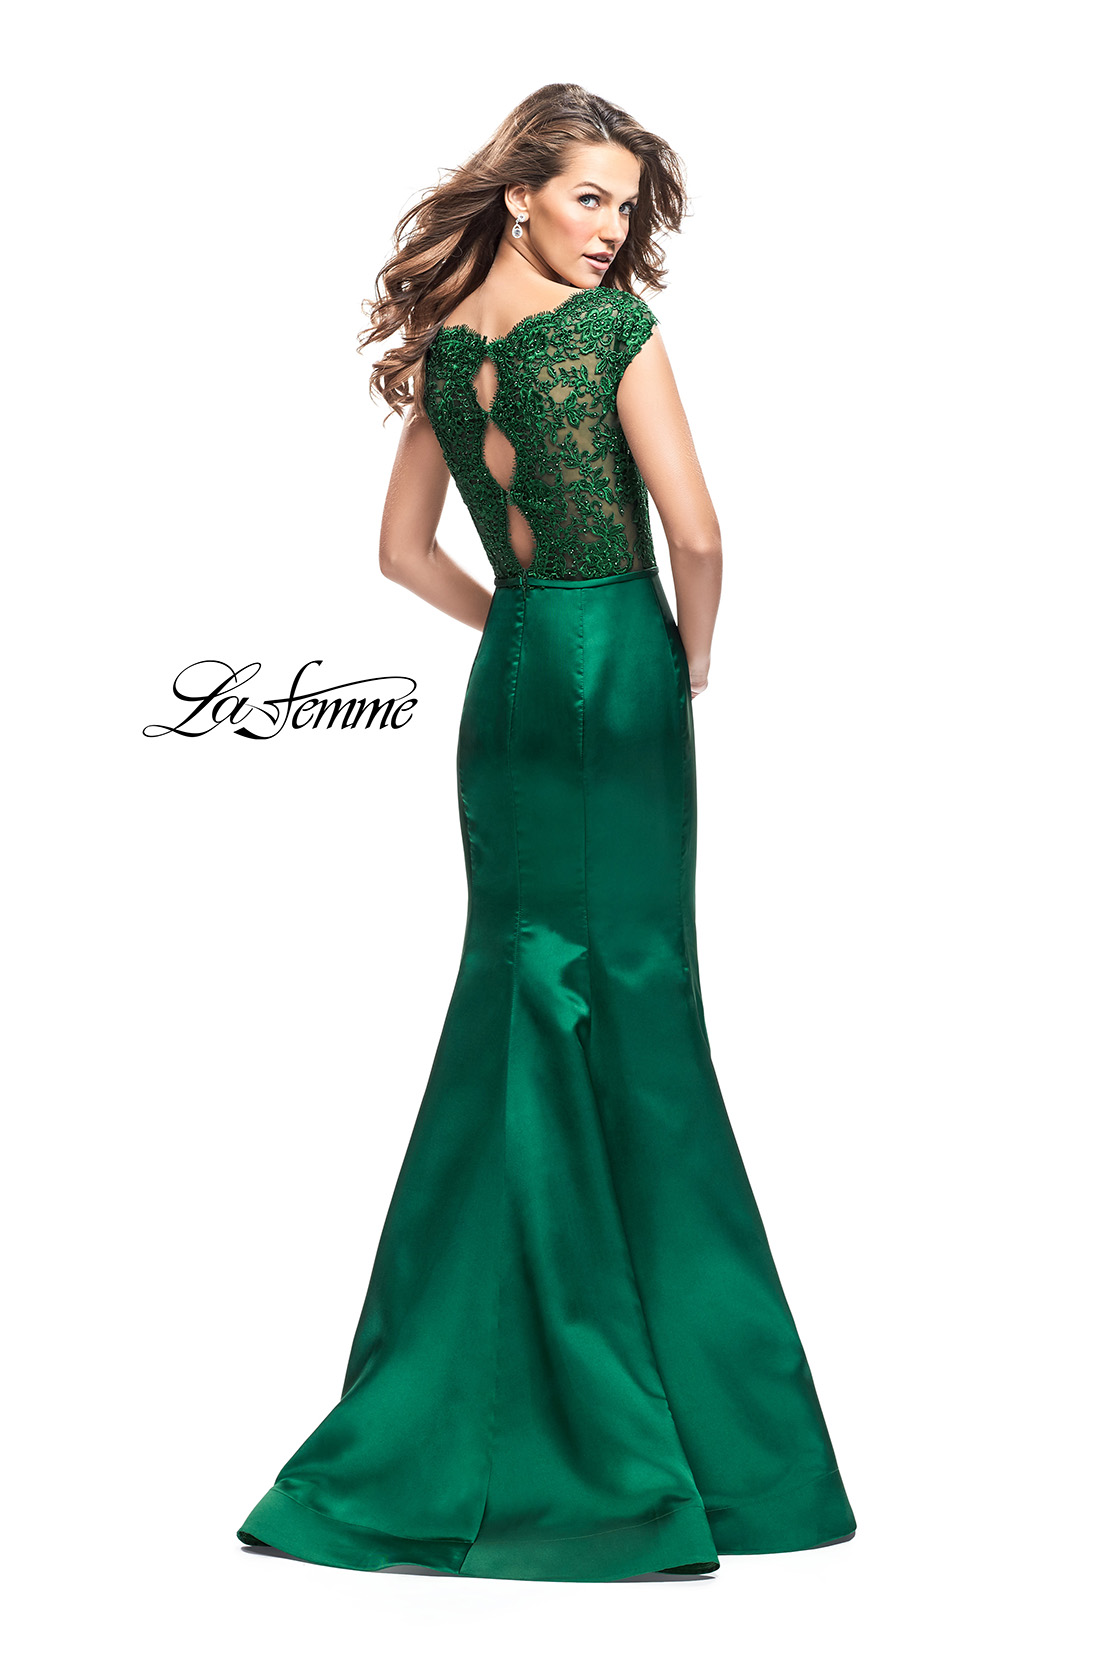 Mermaid Green Prom Dress with Lace Back by La Femme